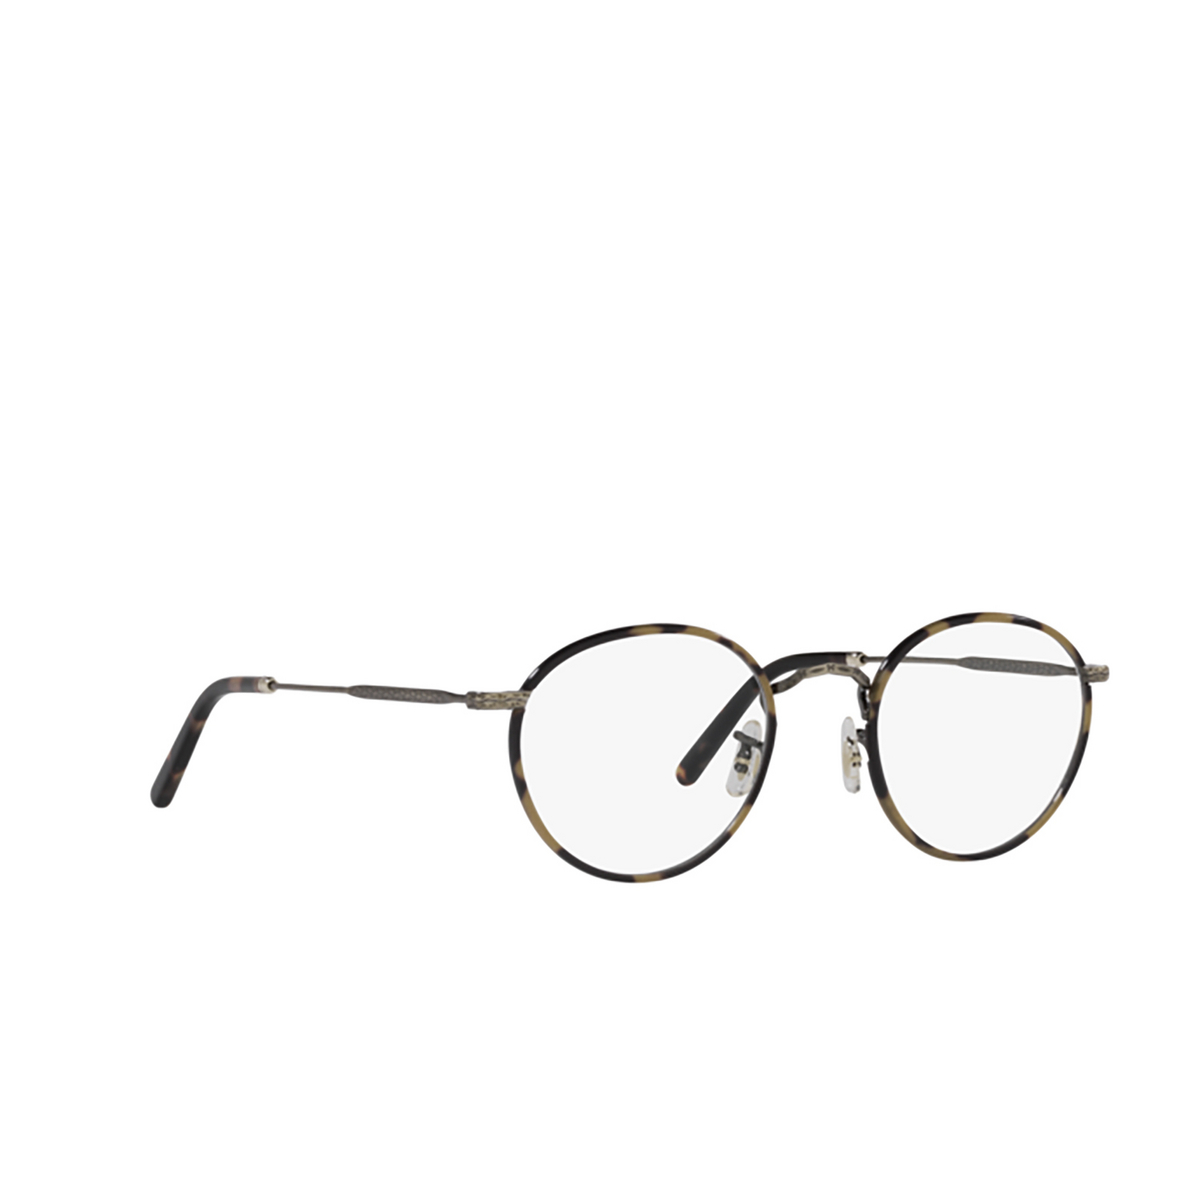 Oliver Peoples CARLING Eyeglasses 5284 Antique Gold / Dtb - three-quarters view